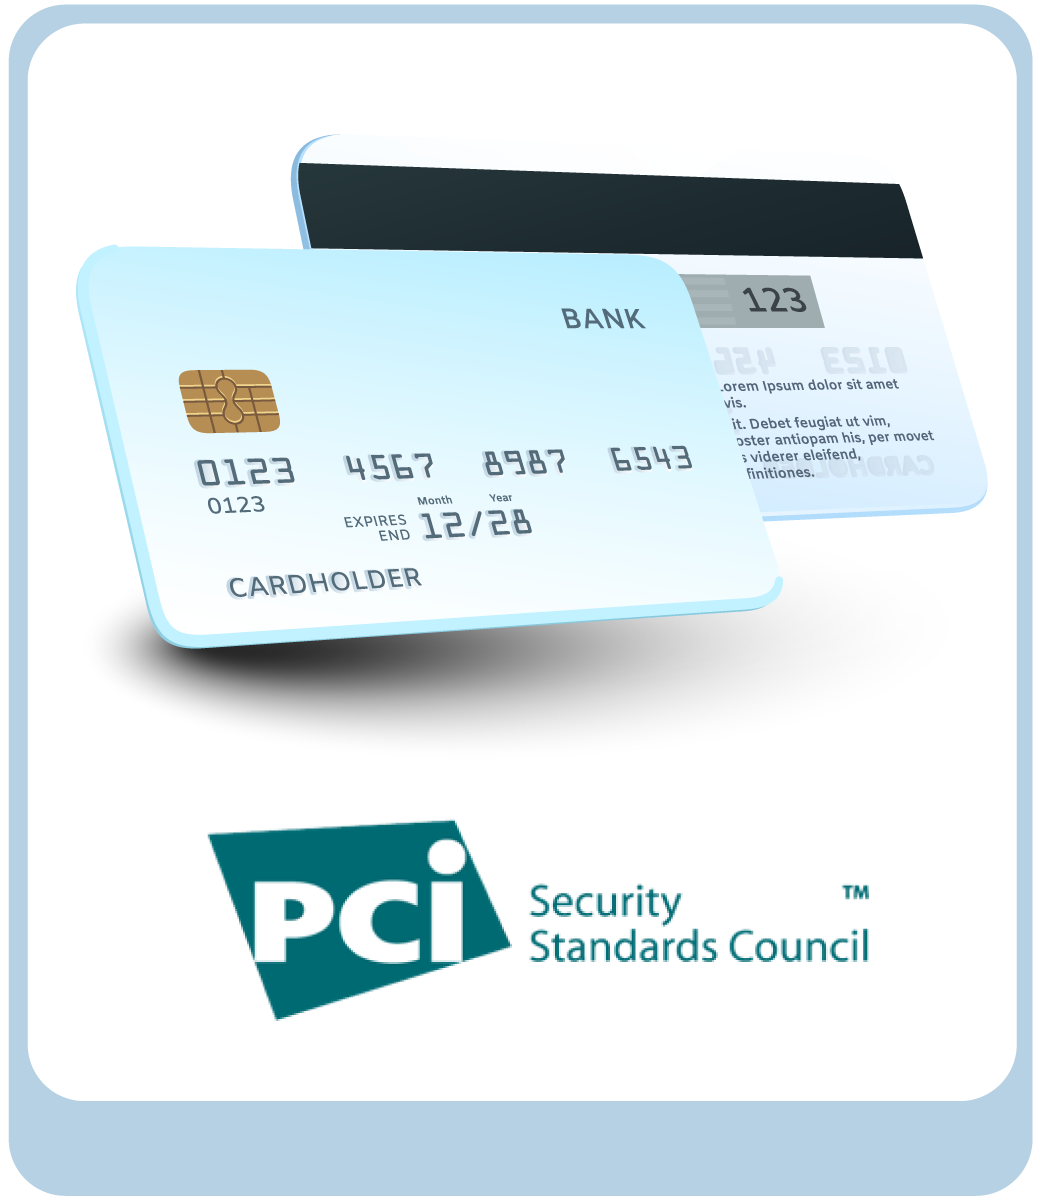 INCREASED PROTECTION AND PCI COMPLIANCE